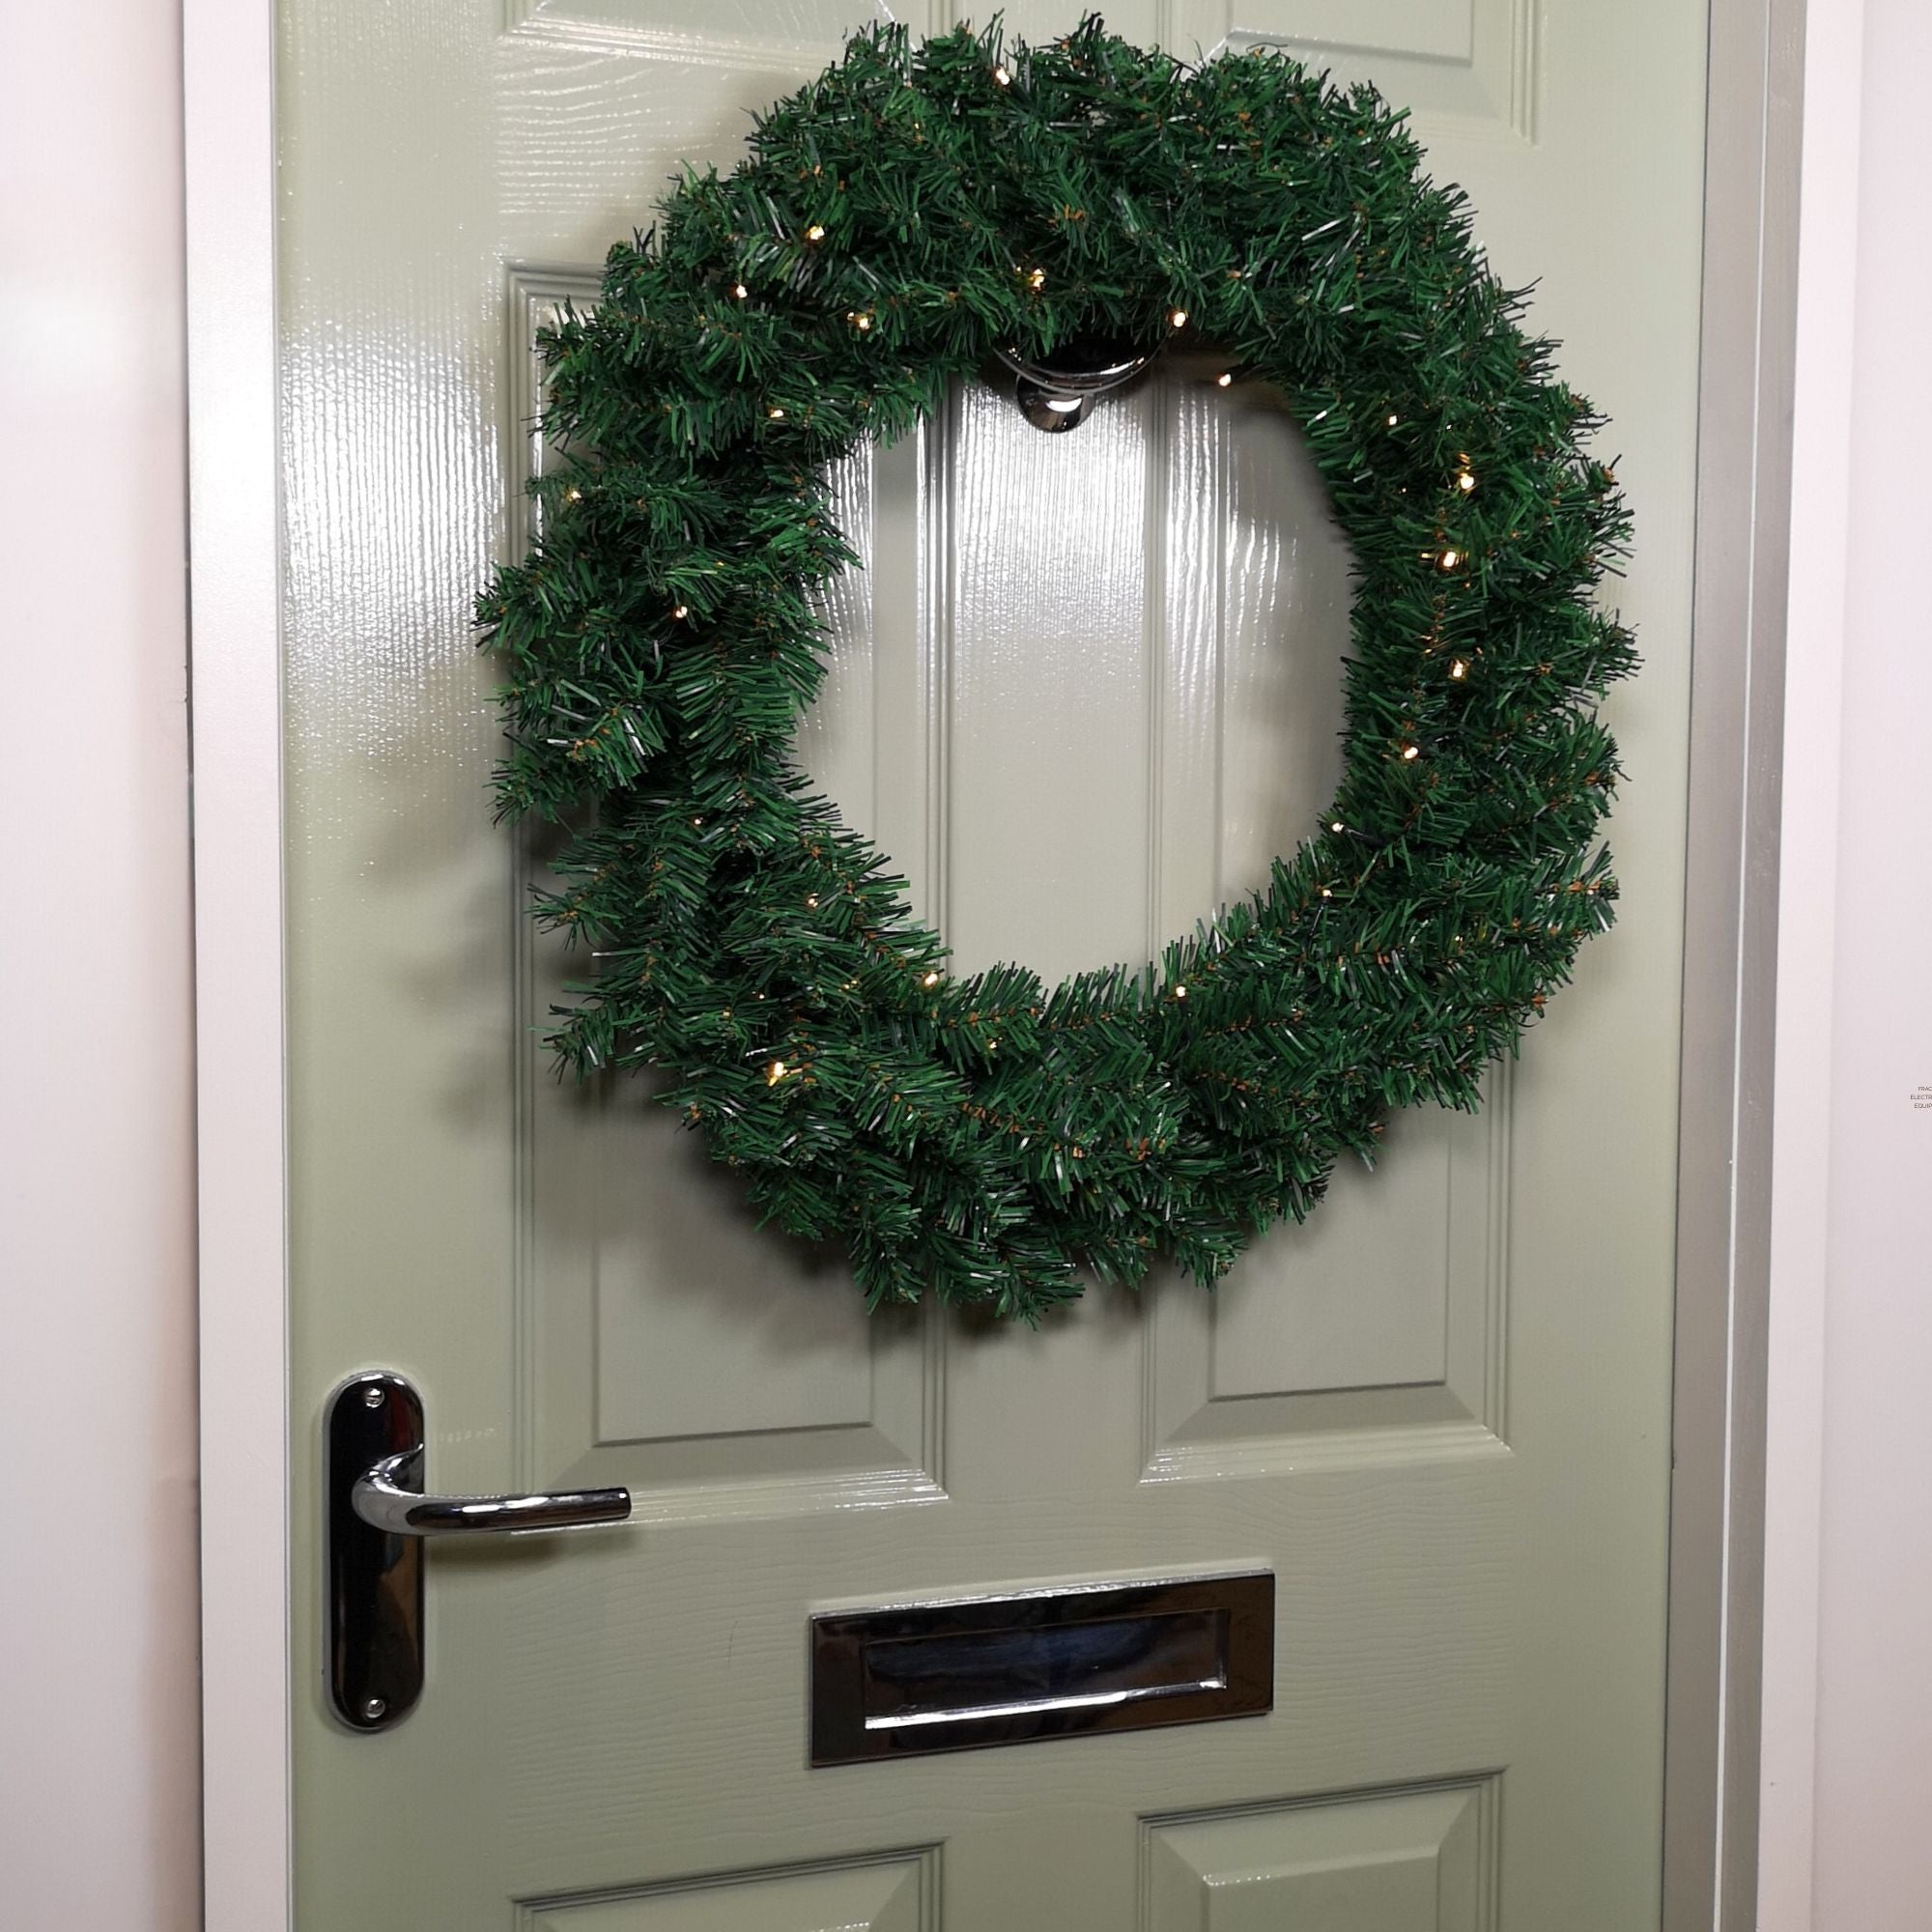 60cm Pre Lit Plain Green Christmas Wreath with Warm White LEDs and 160 Tips